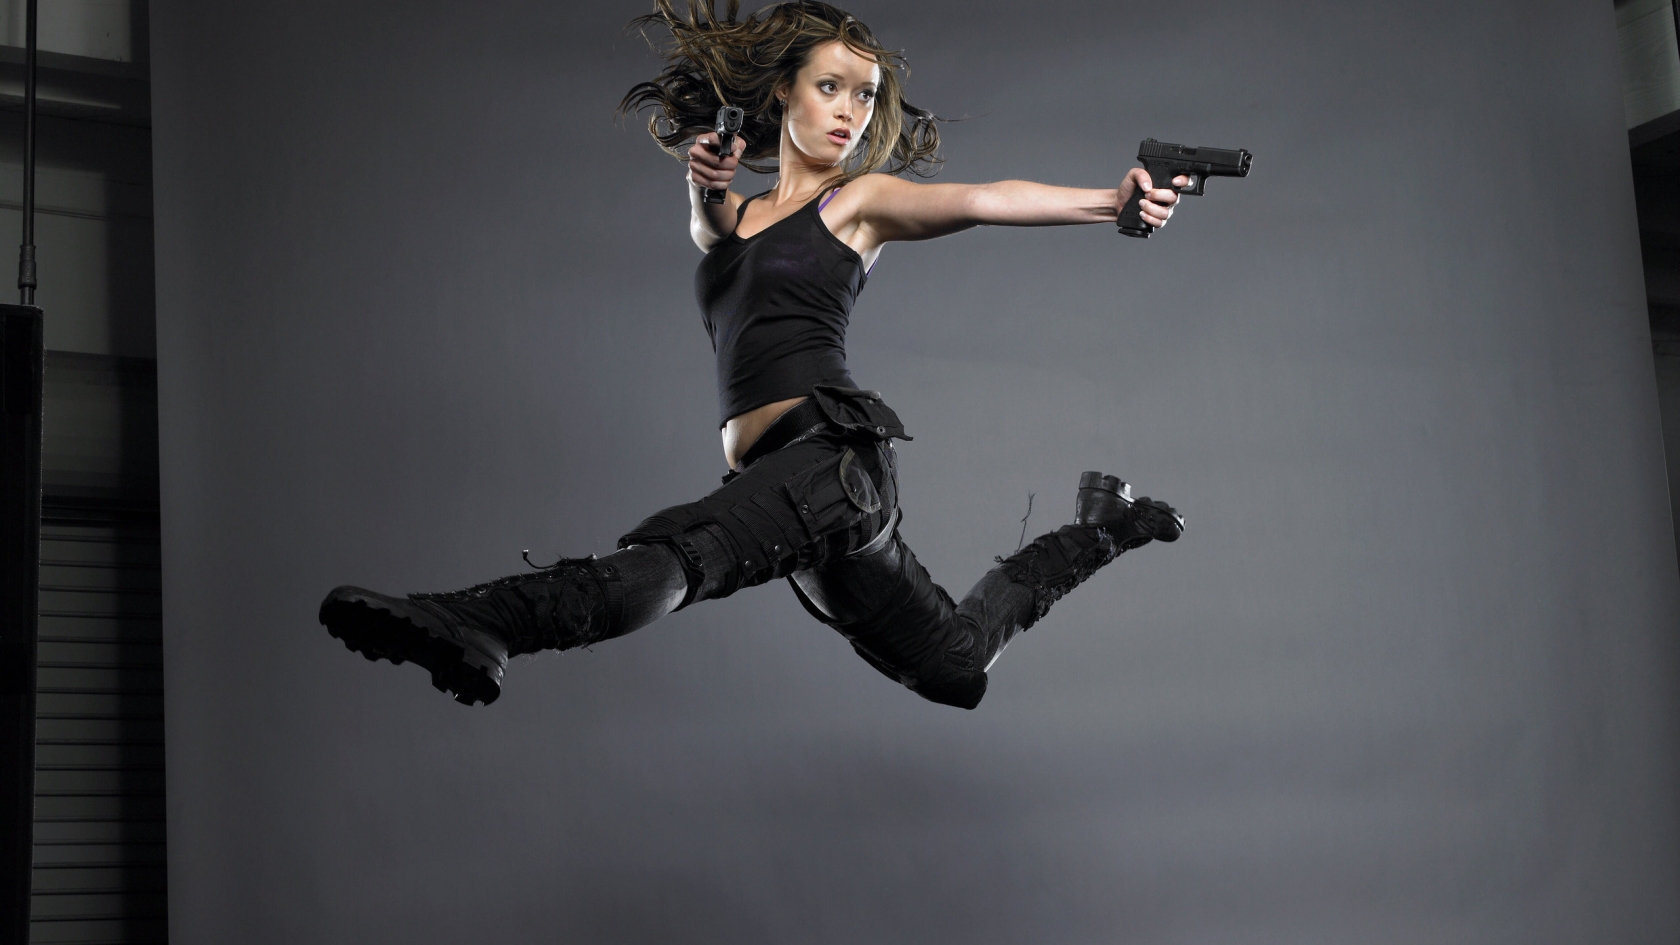 Summer Glau With Guns for 1680 x 945 HDTV resolution